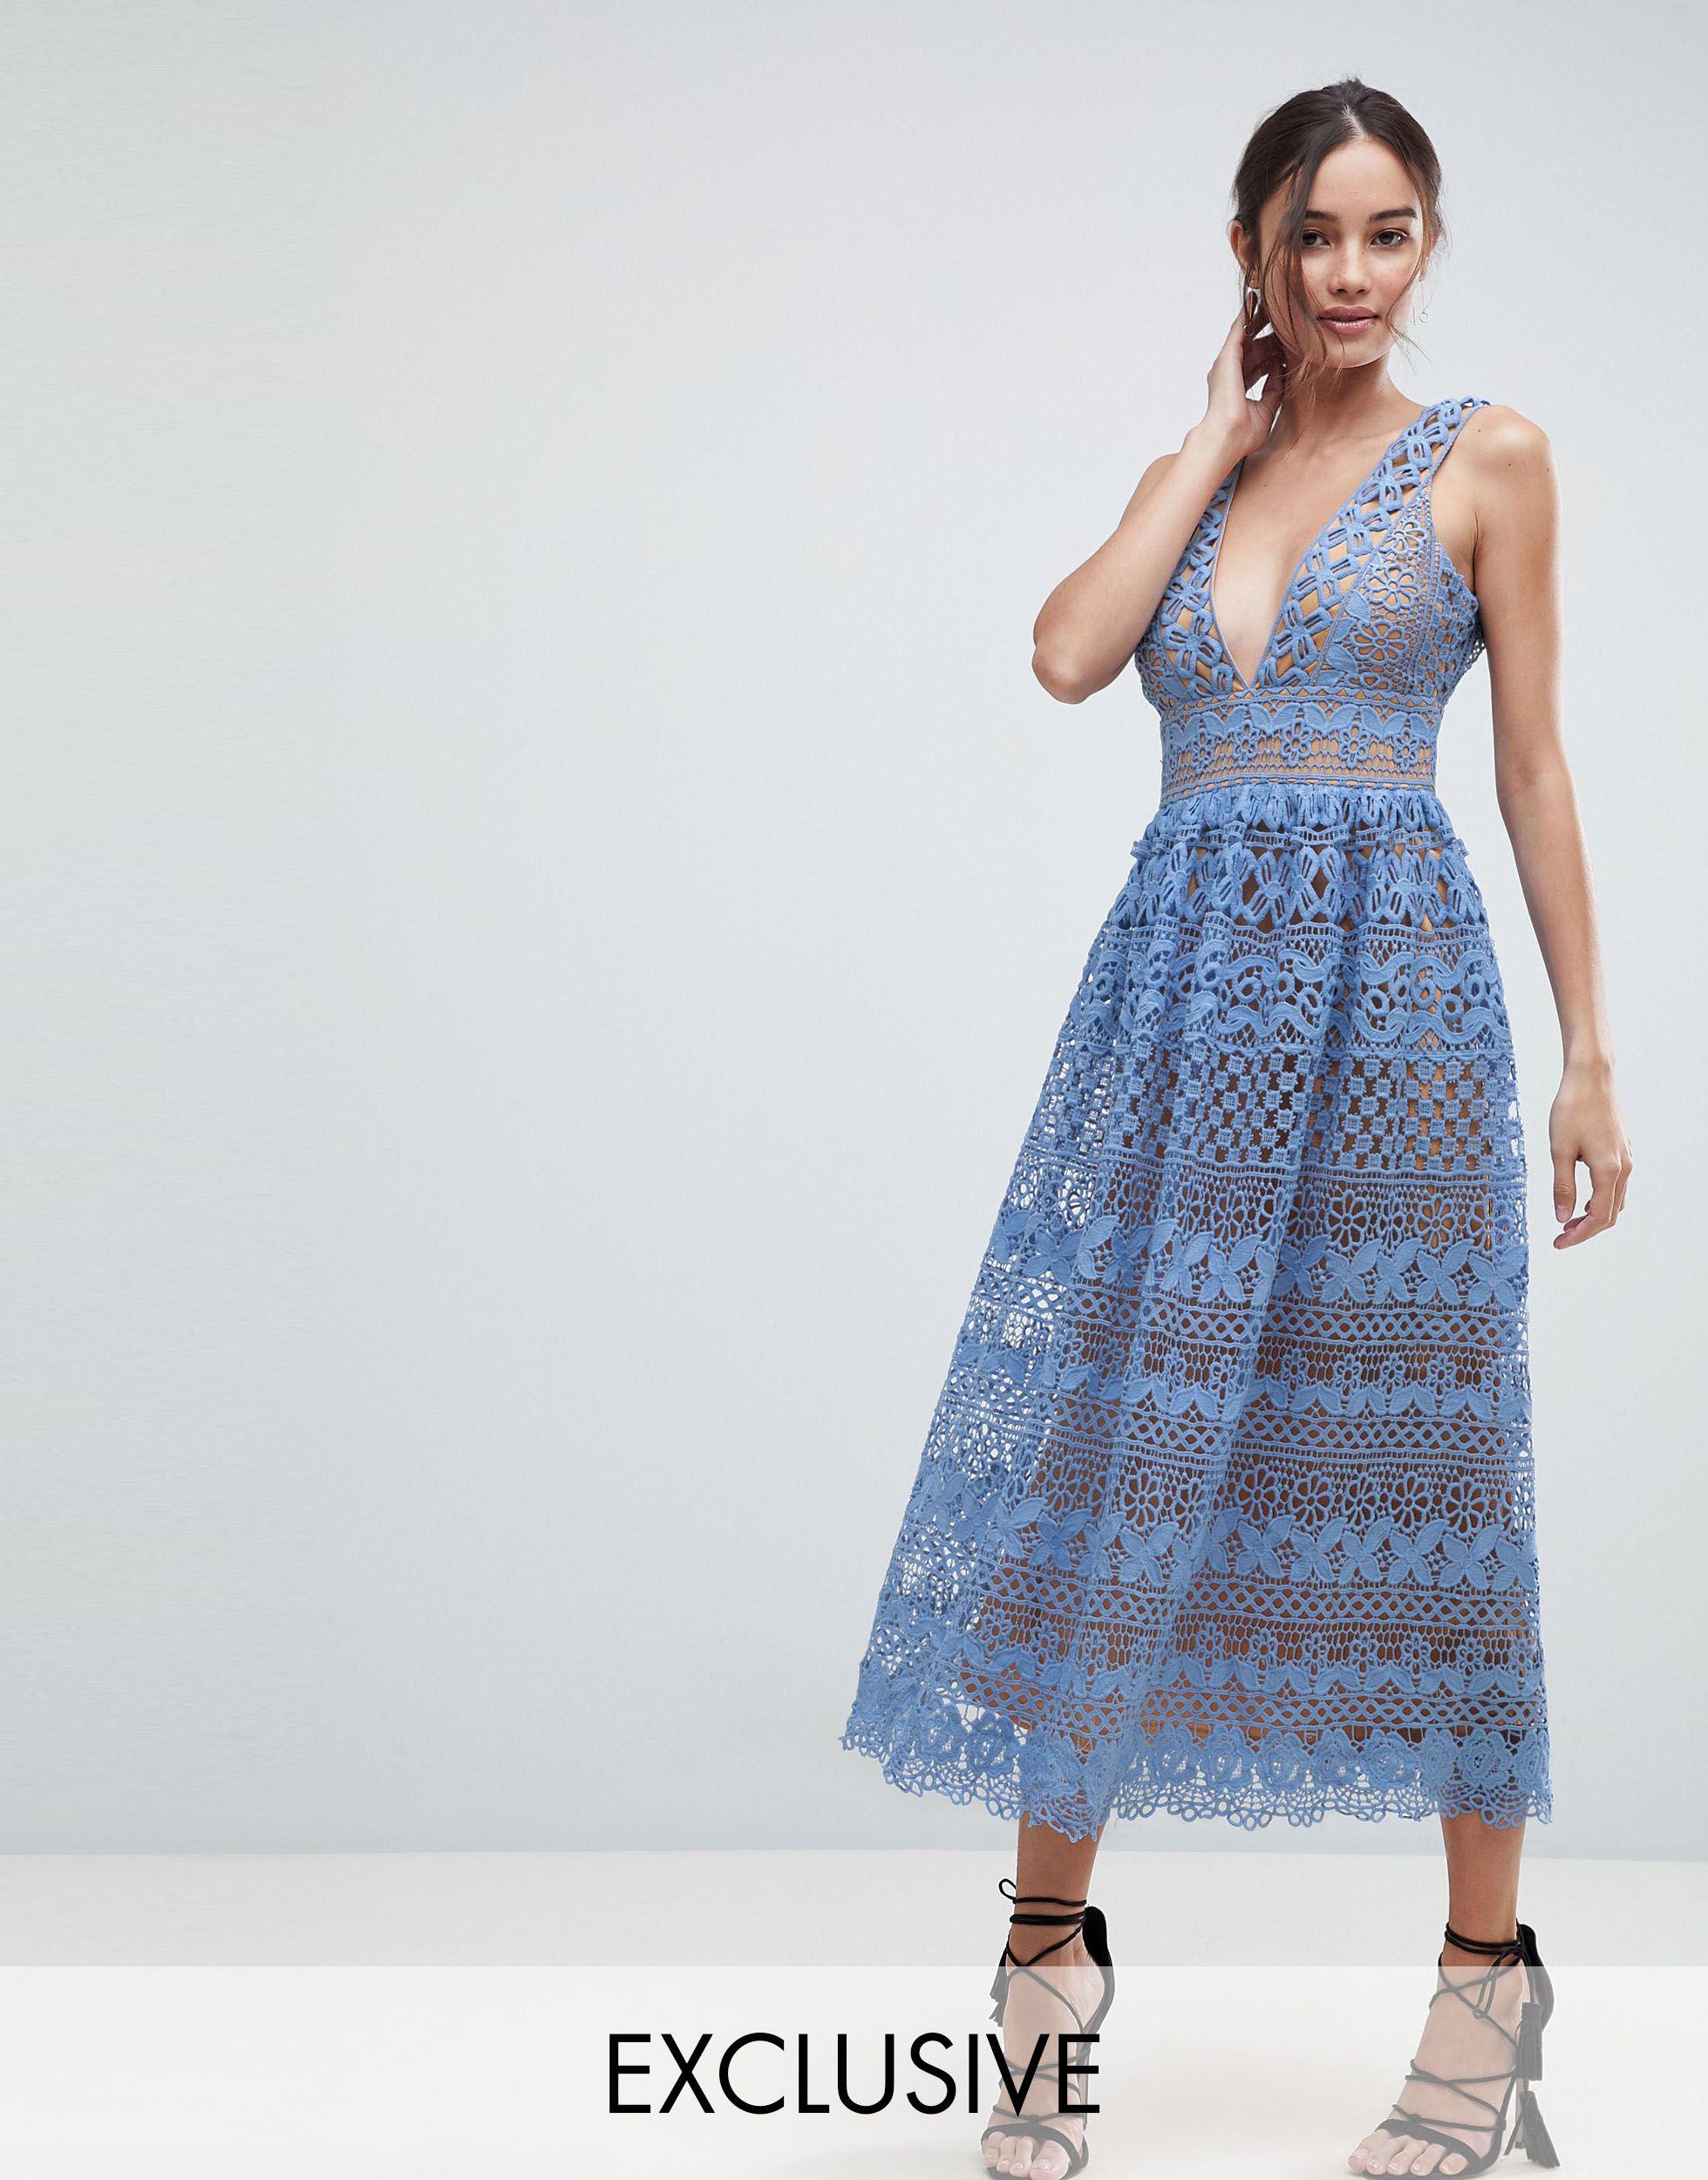 Boohoo Exclusive Lace Midi Dress in Blue - Lyst